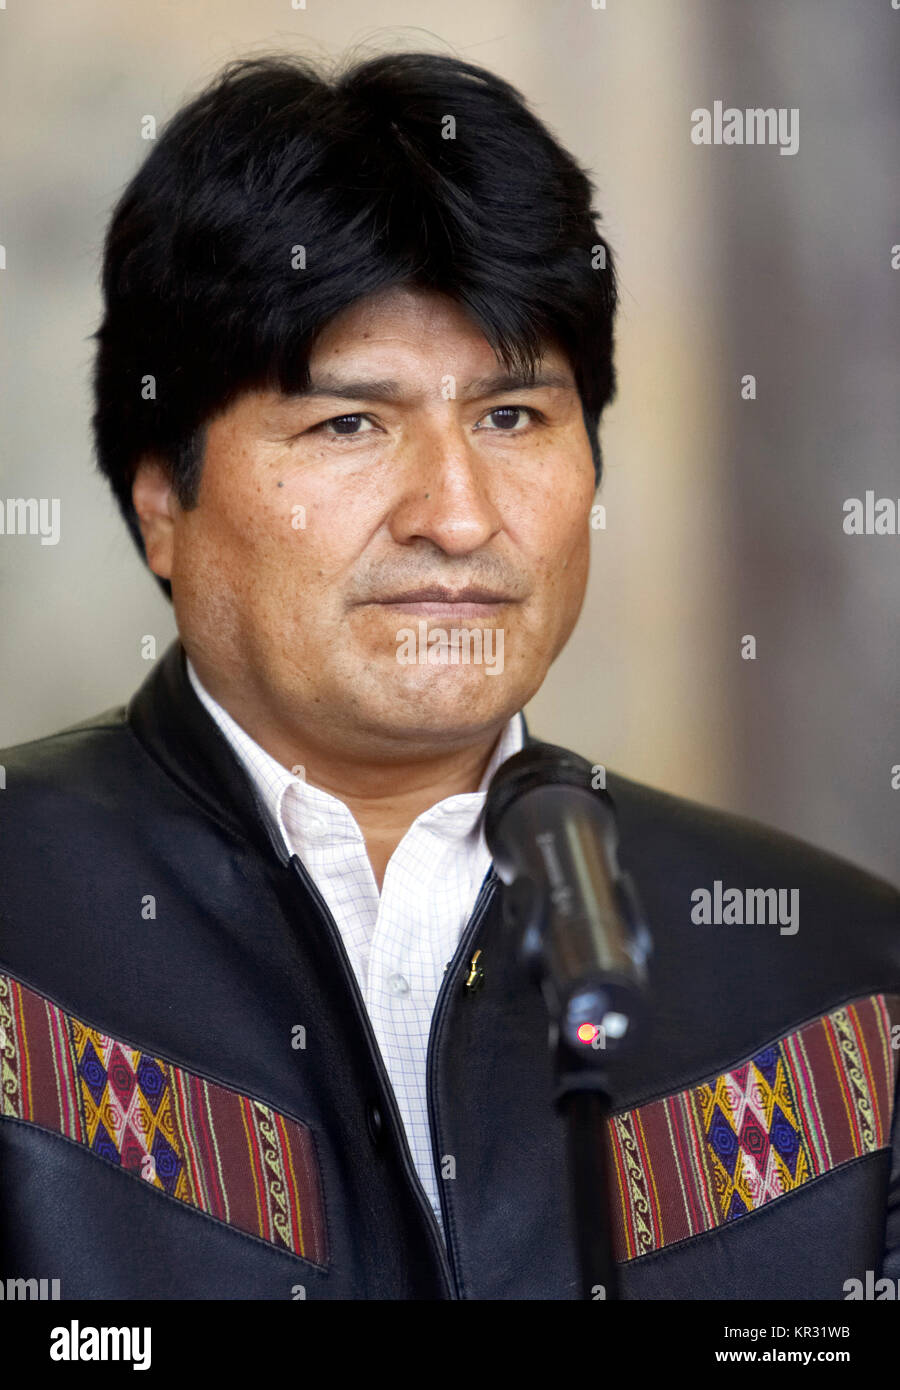 President of Bolivia Evo Morales, on May 16, 2006 (archives 2006) Stock Photo